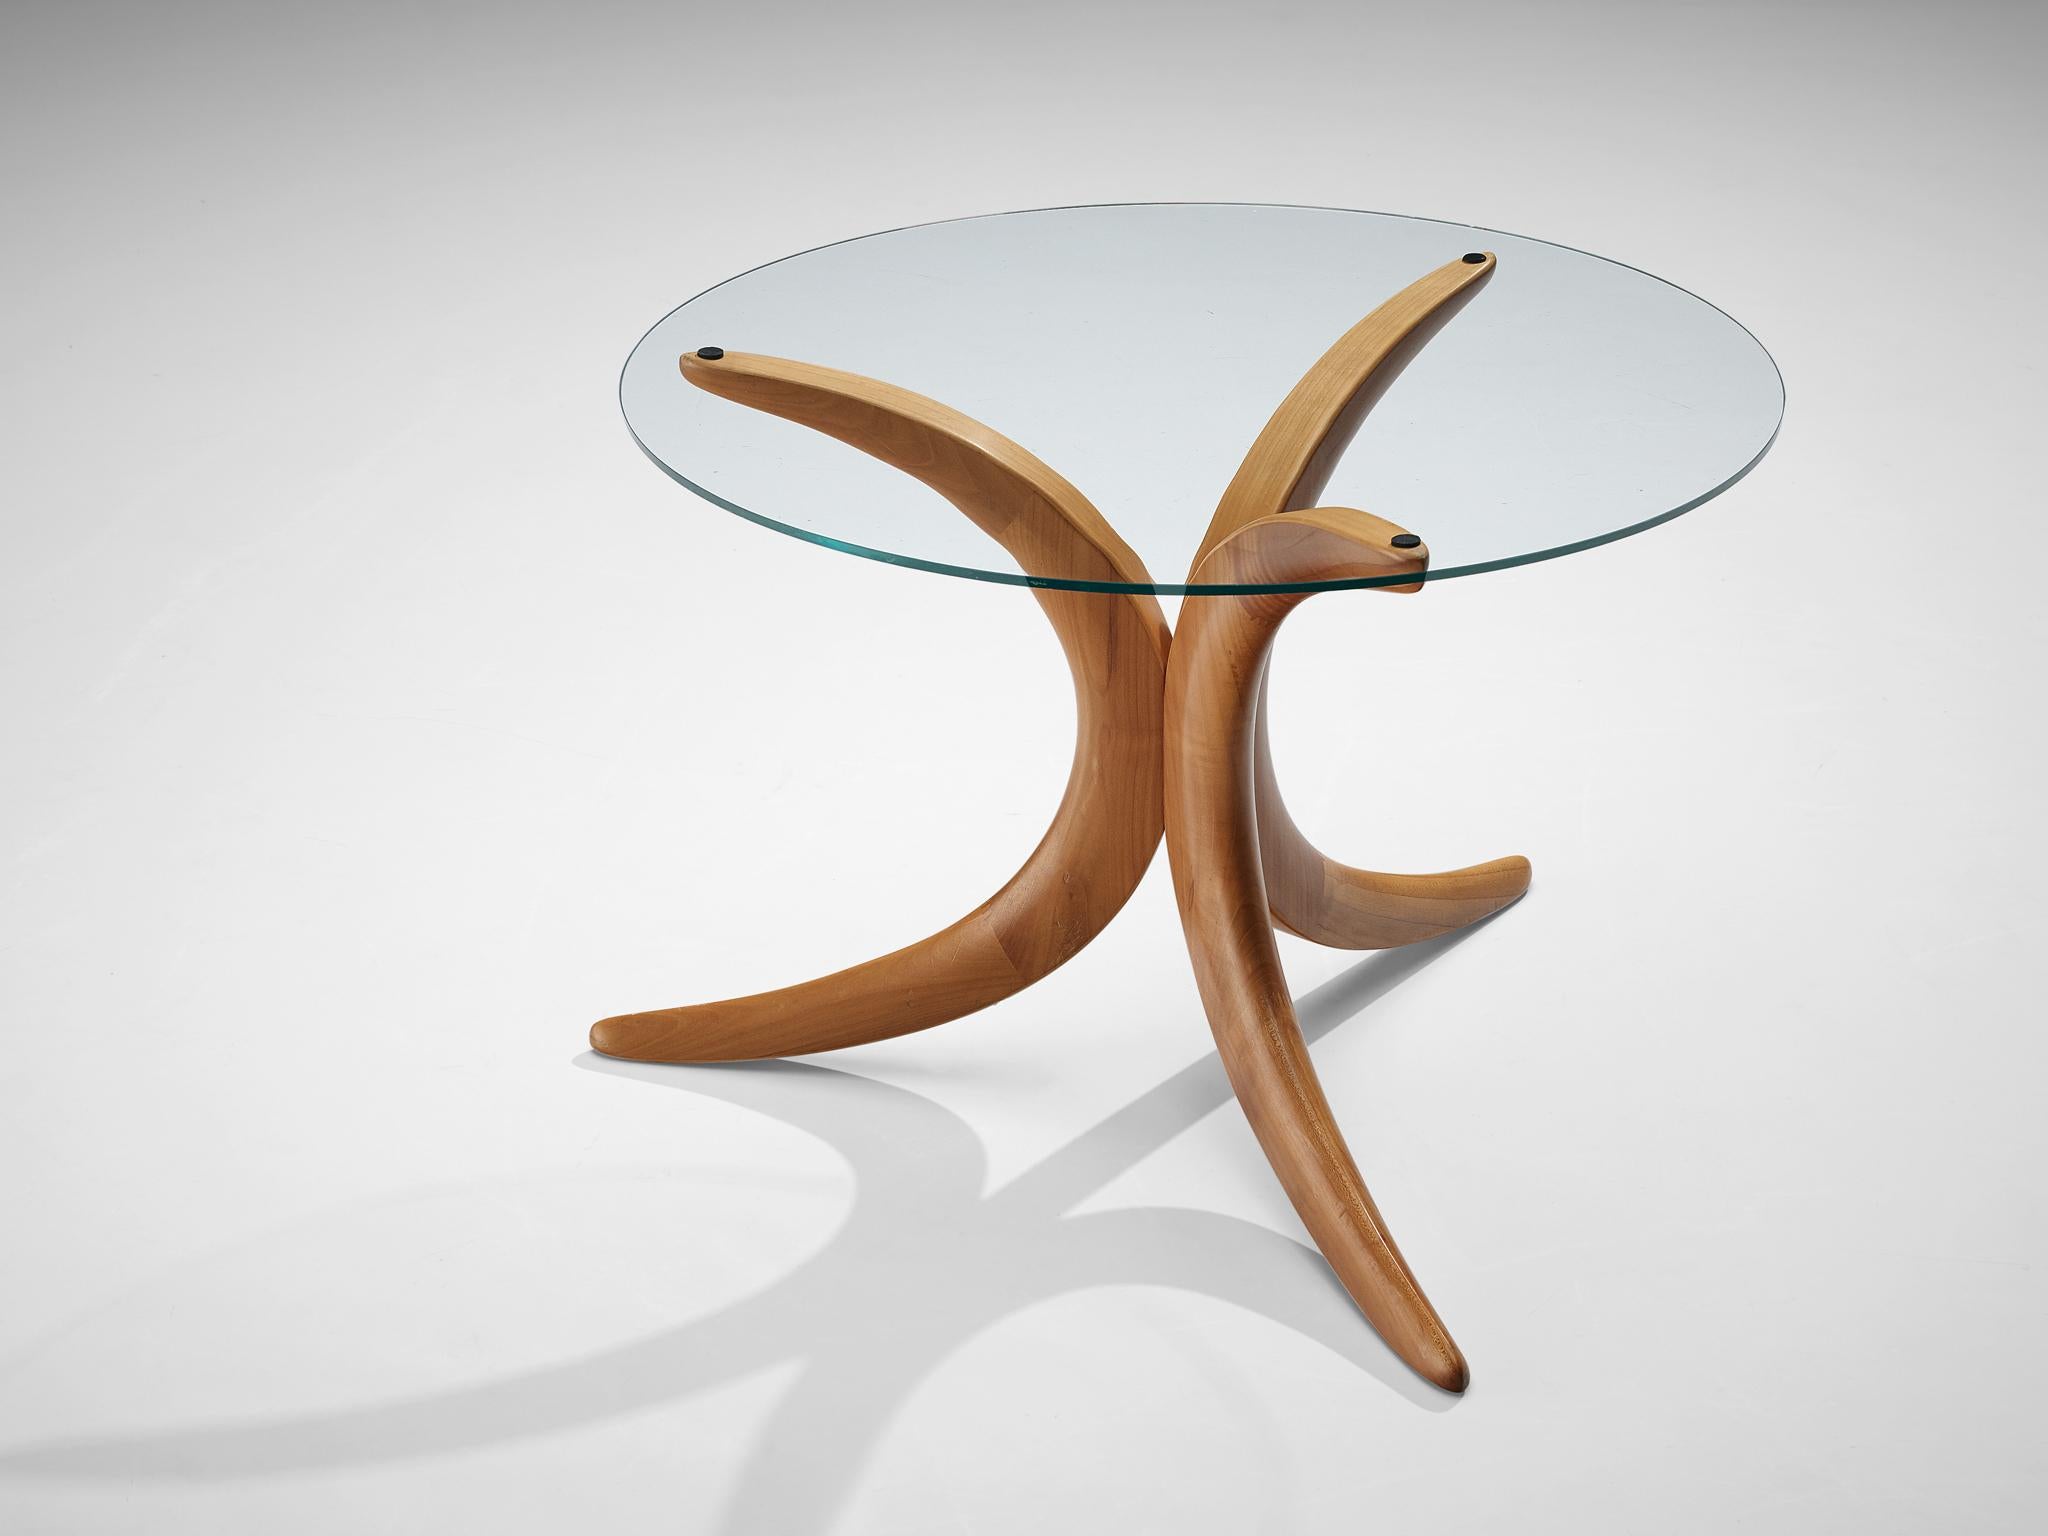 Organic coffee table, wood, glass, Italy, 1970s

Solid wooden tripod coffee table from Italian origin. With the transparent glass top, the base manifests itself as a sculptural object. The wooden connections are a nice detail.

